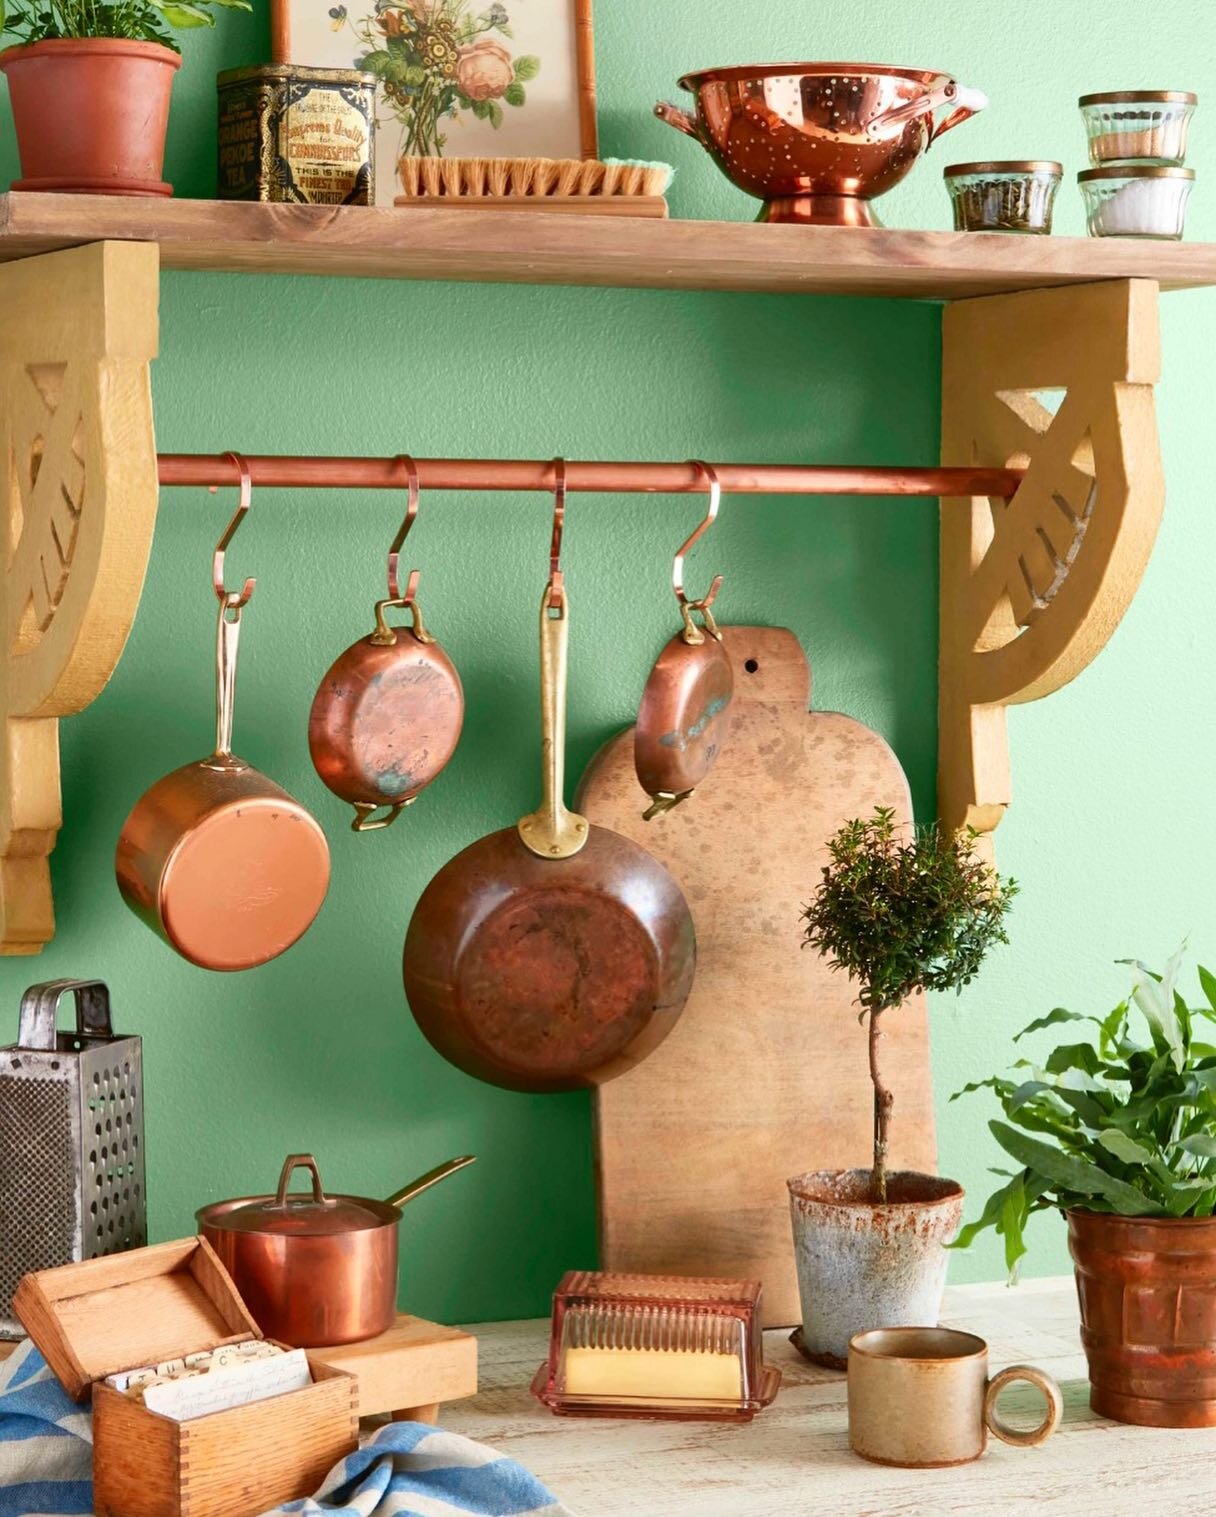 Copper Kitchen Scenes for @countrylivingmag 🌞